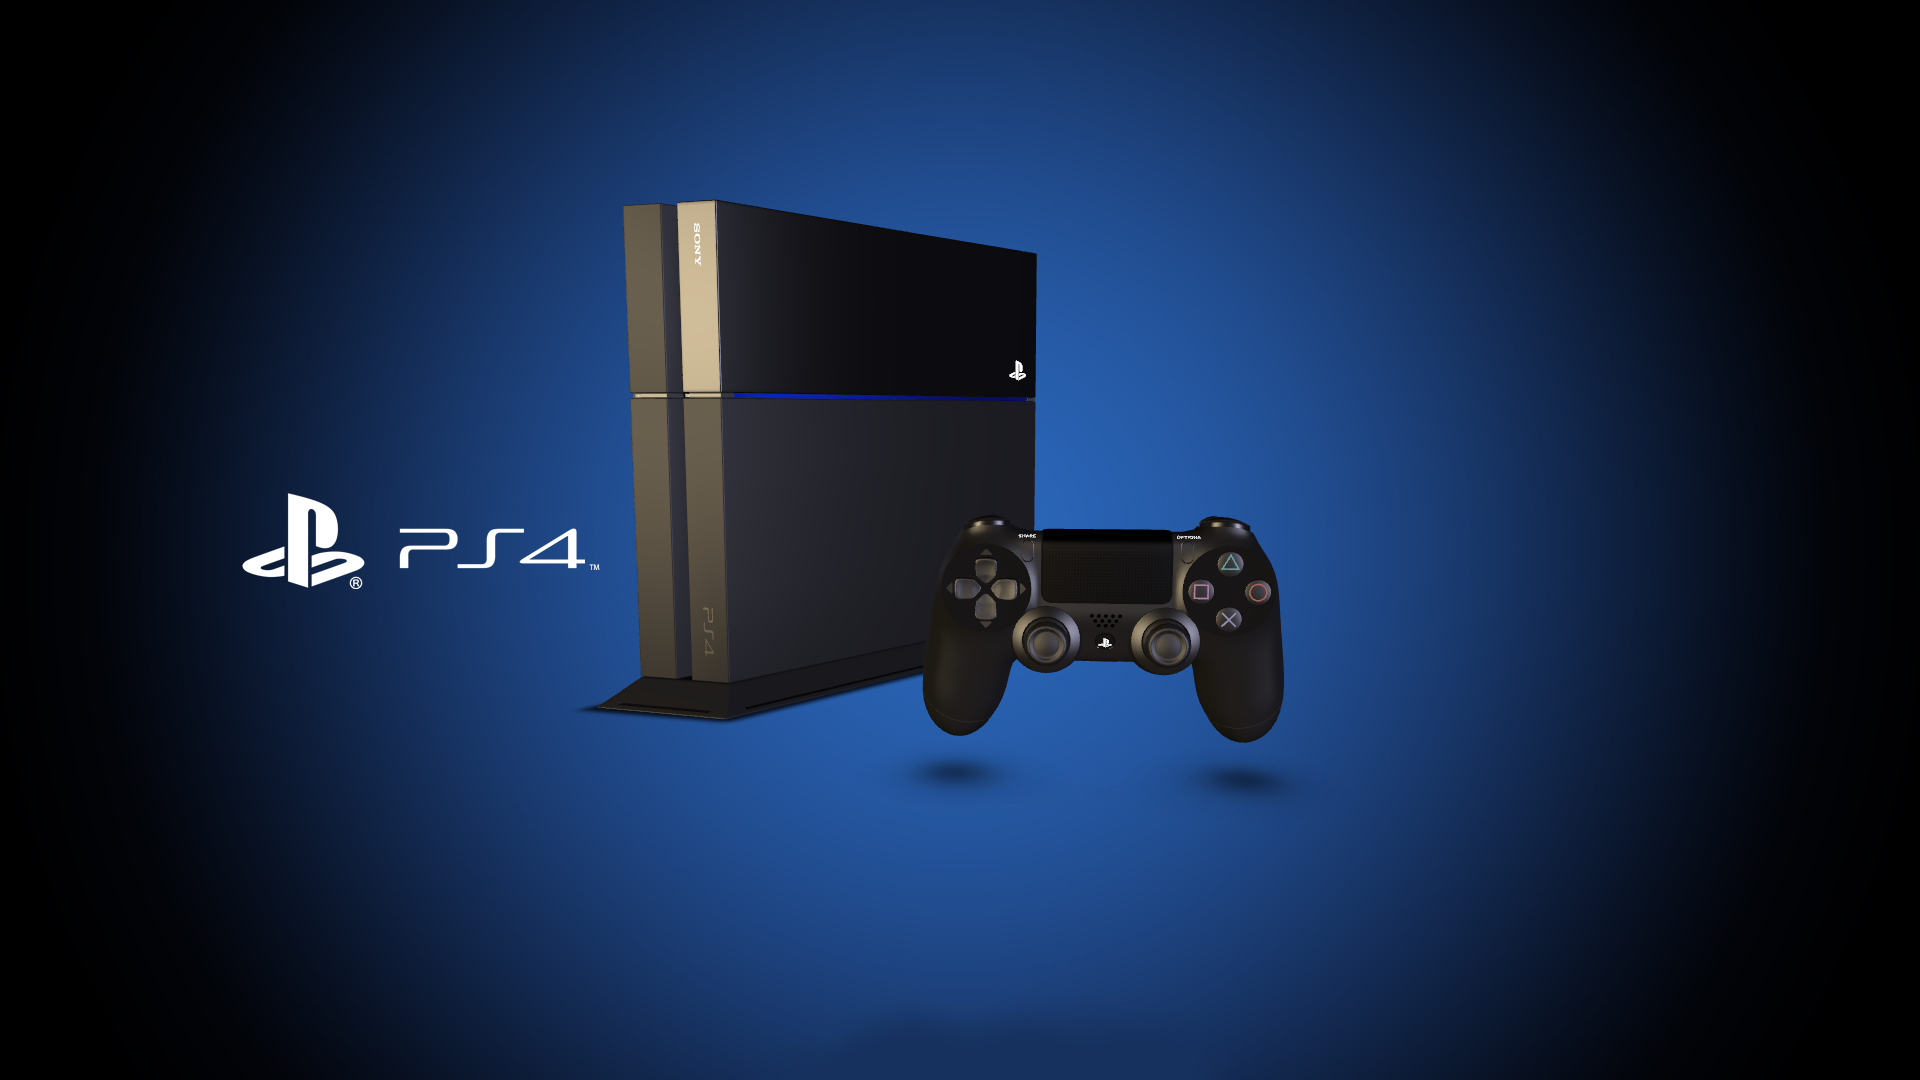 Sony PlayStation 4 Wallpapers - Wallmanage.com